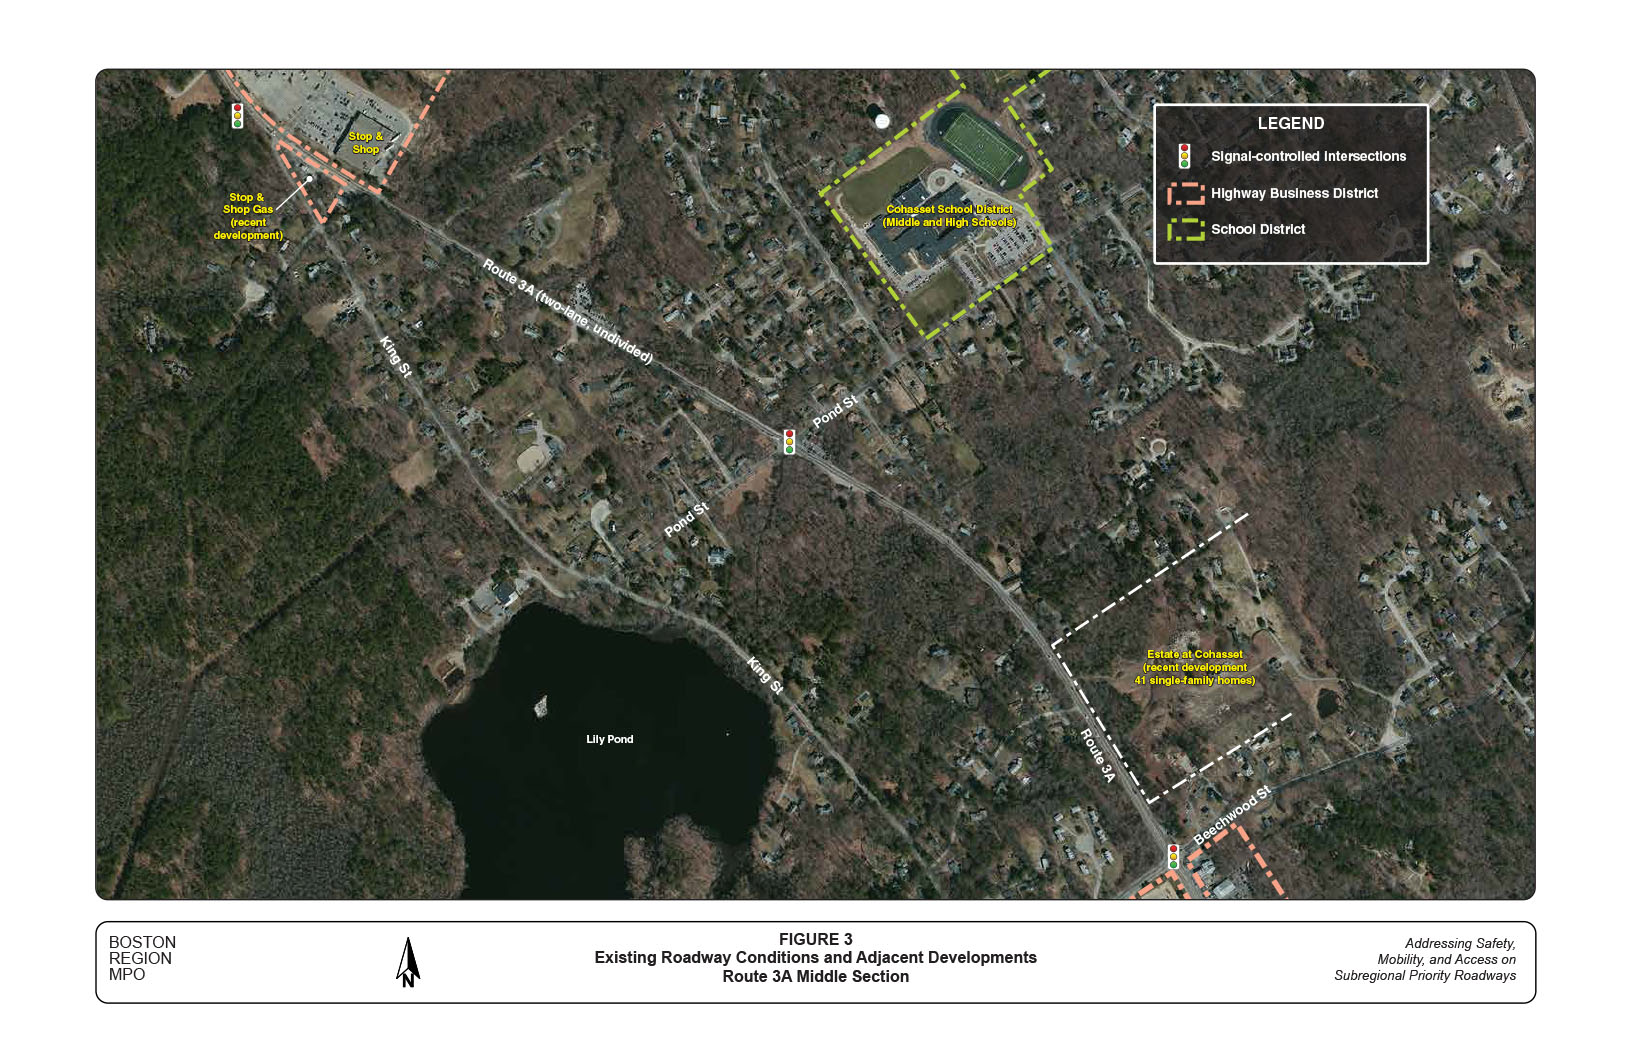 Figure 3 is an aerial view map that depicts the existing roadway conditions and adjacent developments in the middle section of the study corridor.